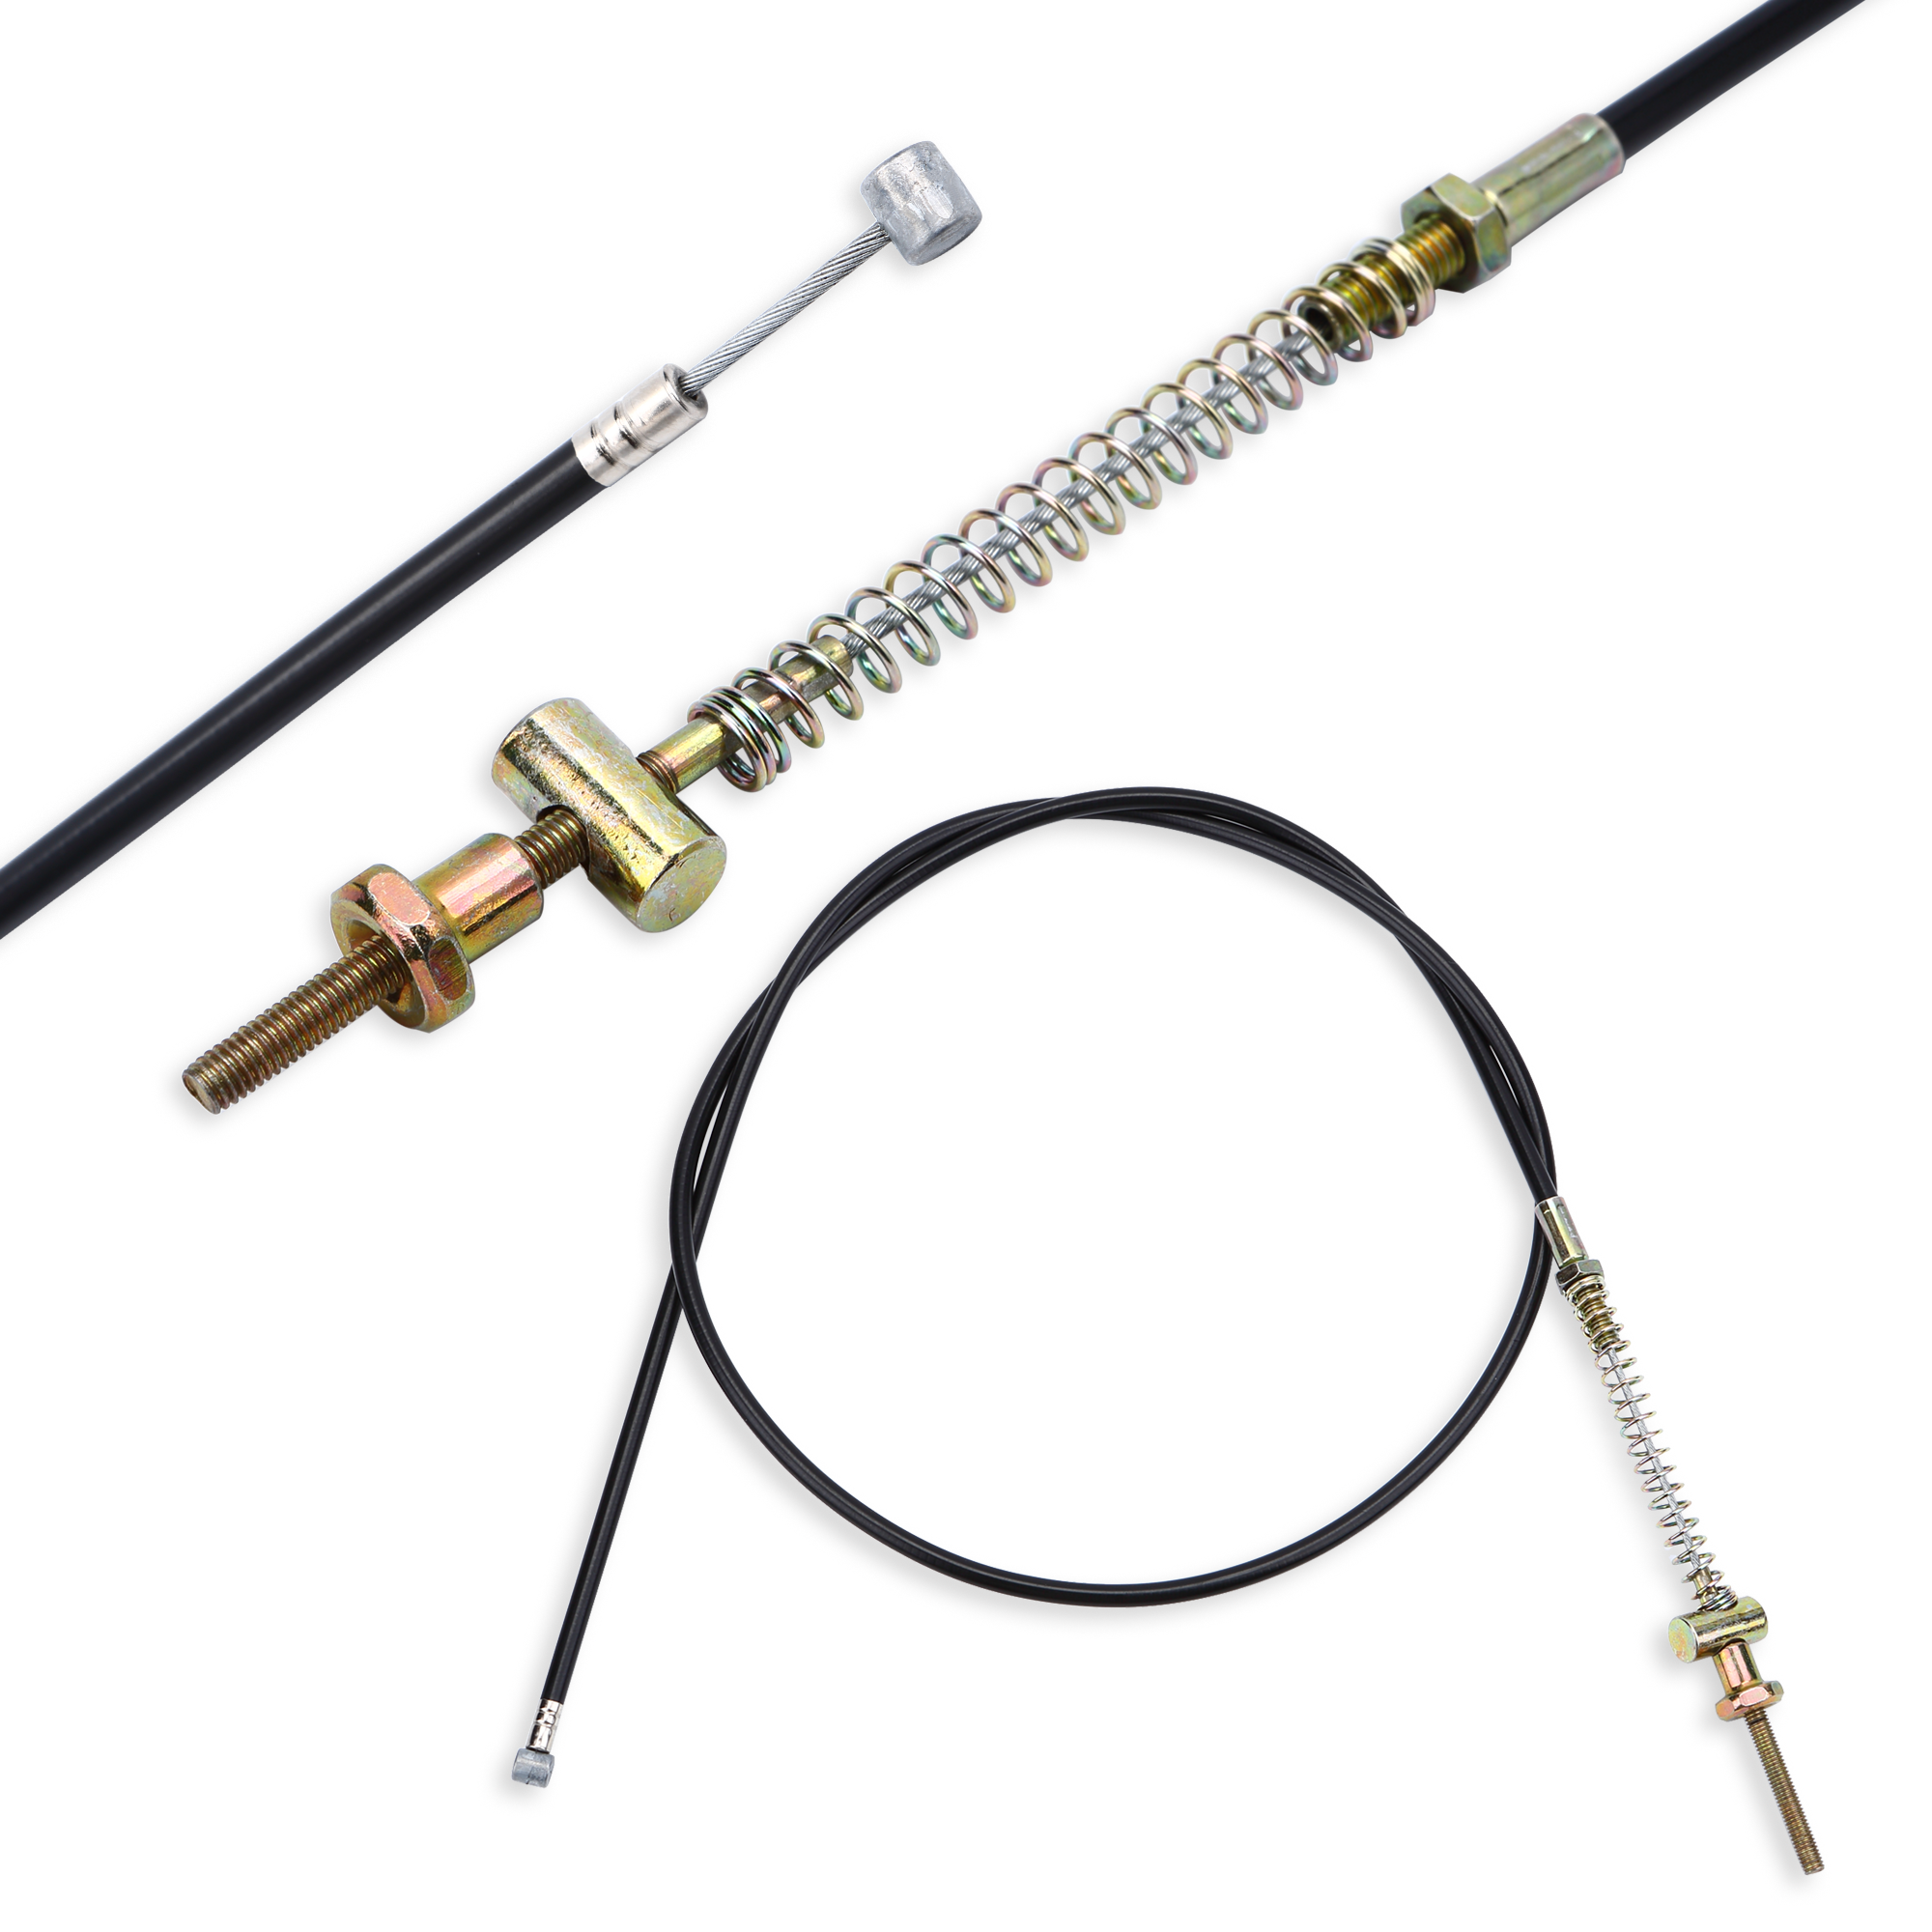 High-carbon steel brake cable